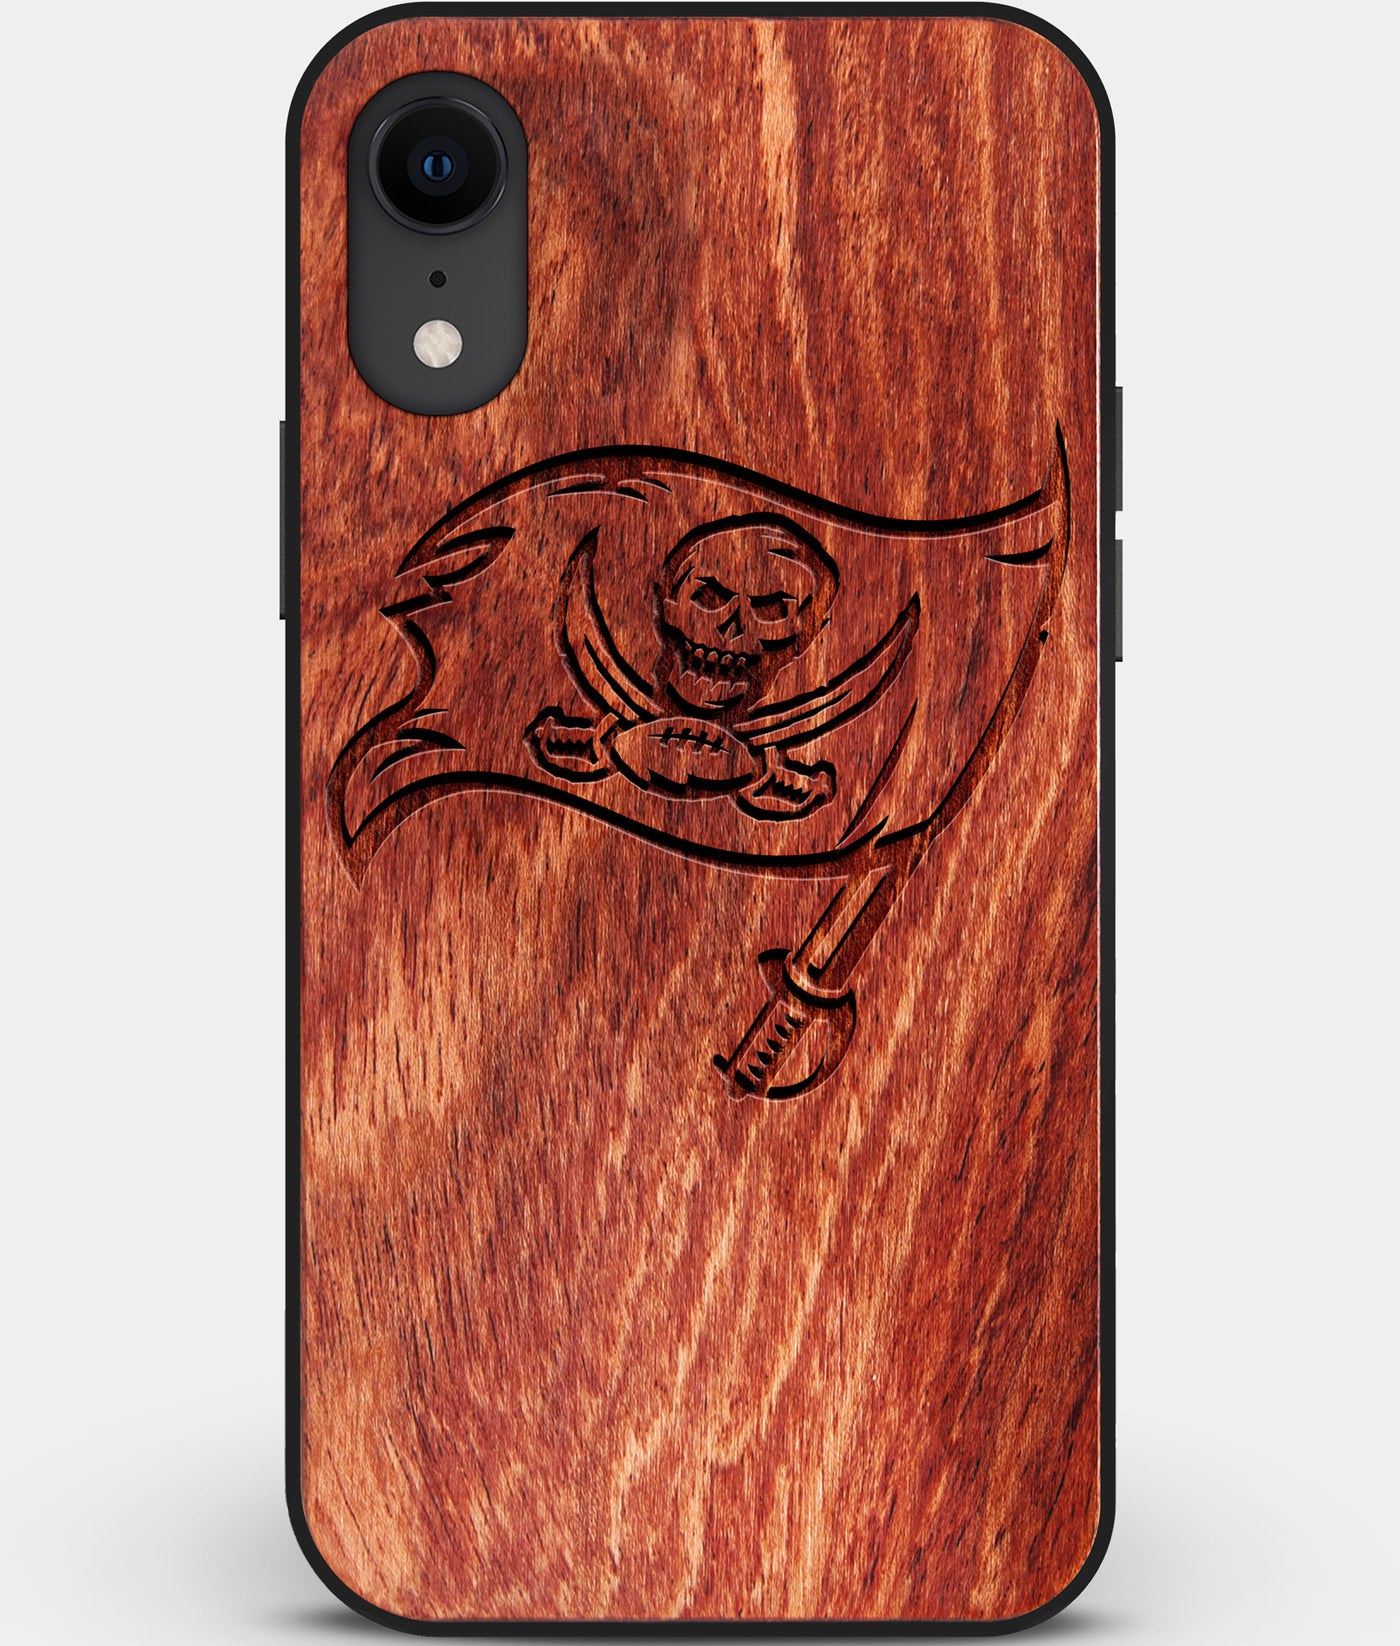 Custom Carved Wood Tampa Bay Buccaneers iPhone XR Case | Personalized Mahogany Wood Tampa Bay Buccaneers Cover, Birthday Gift, Gifts For Him, Monogrammed Gift For Fan | by Engraved In Nature